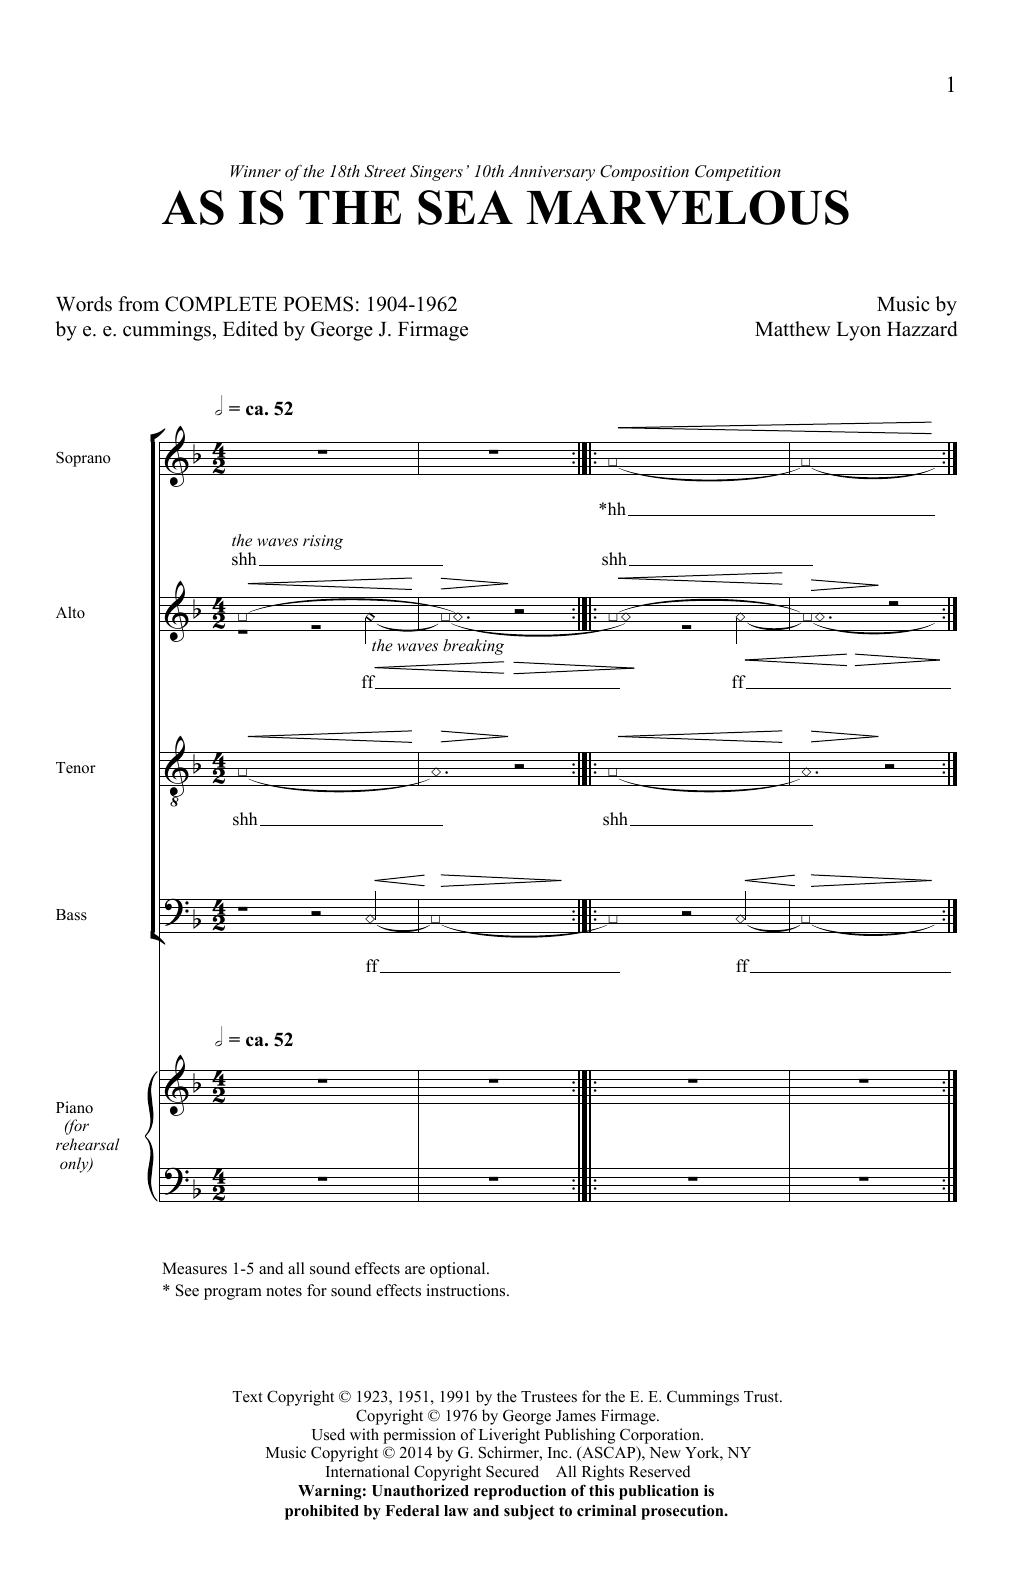 Matthew Lyon Hazzard As Is The Sea Marvelous sheet music notes and chords. Download Printable PDF.